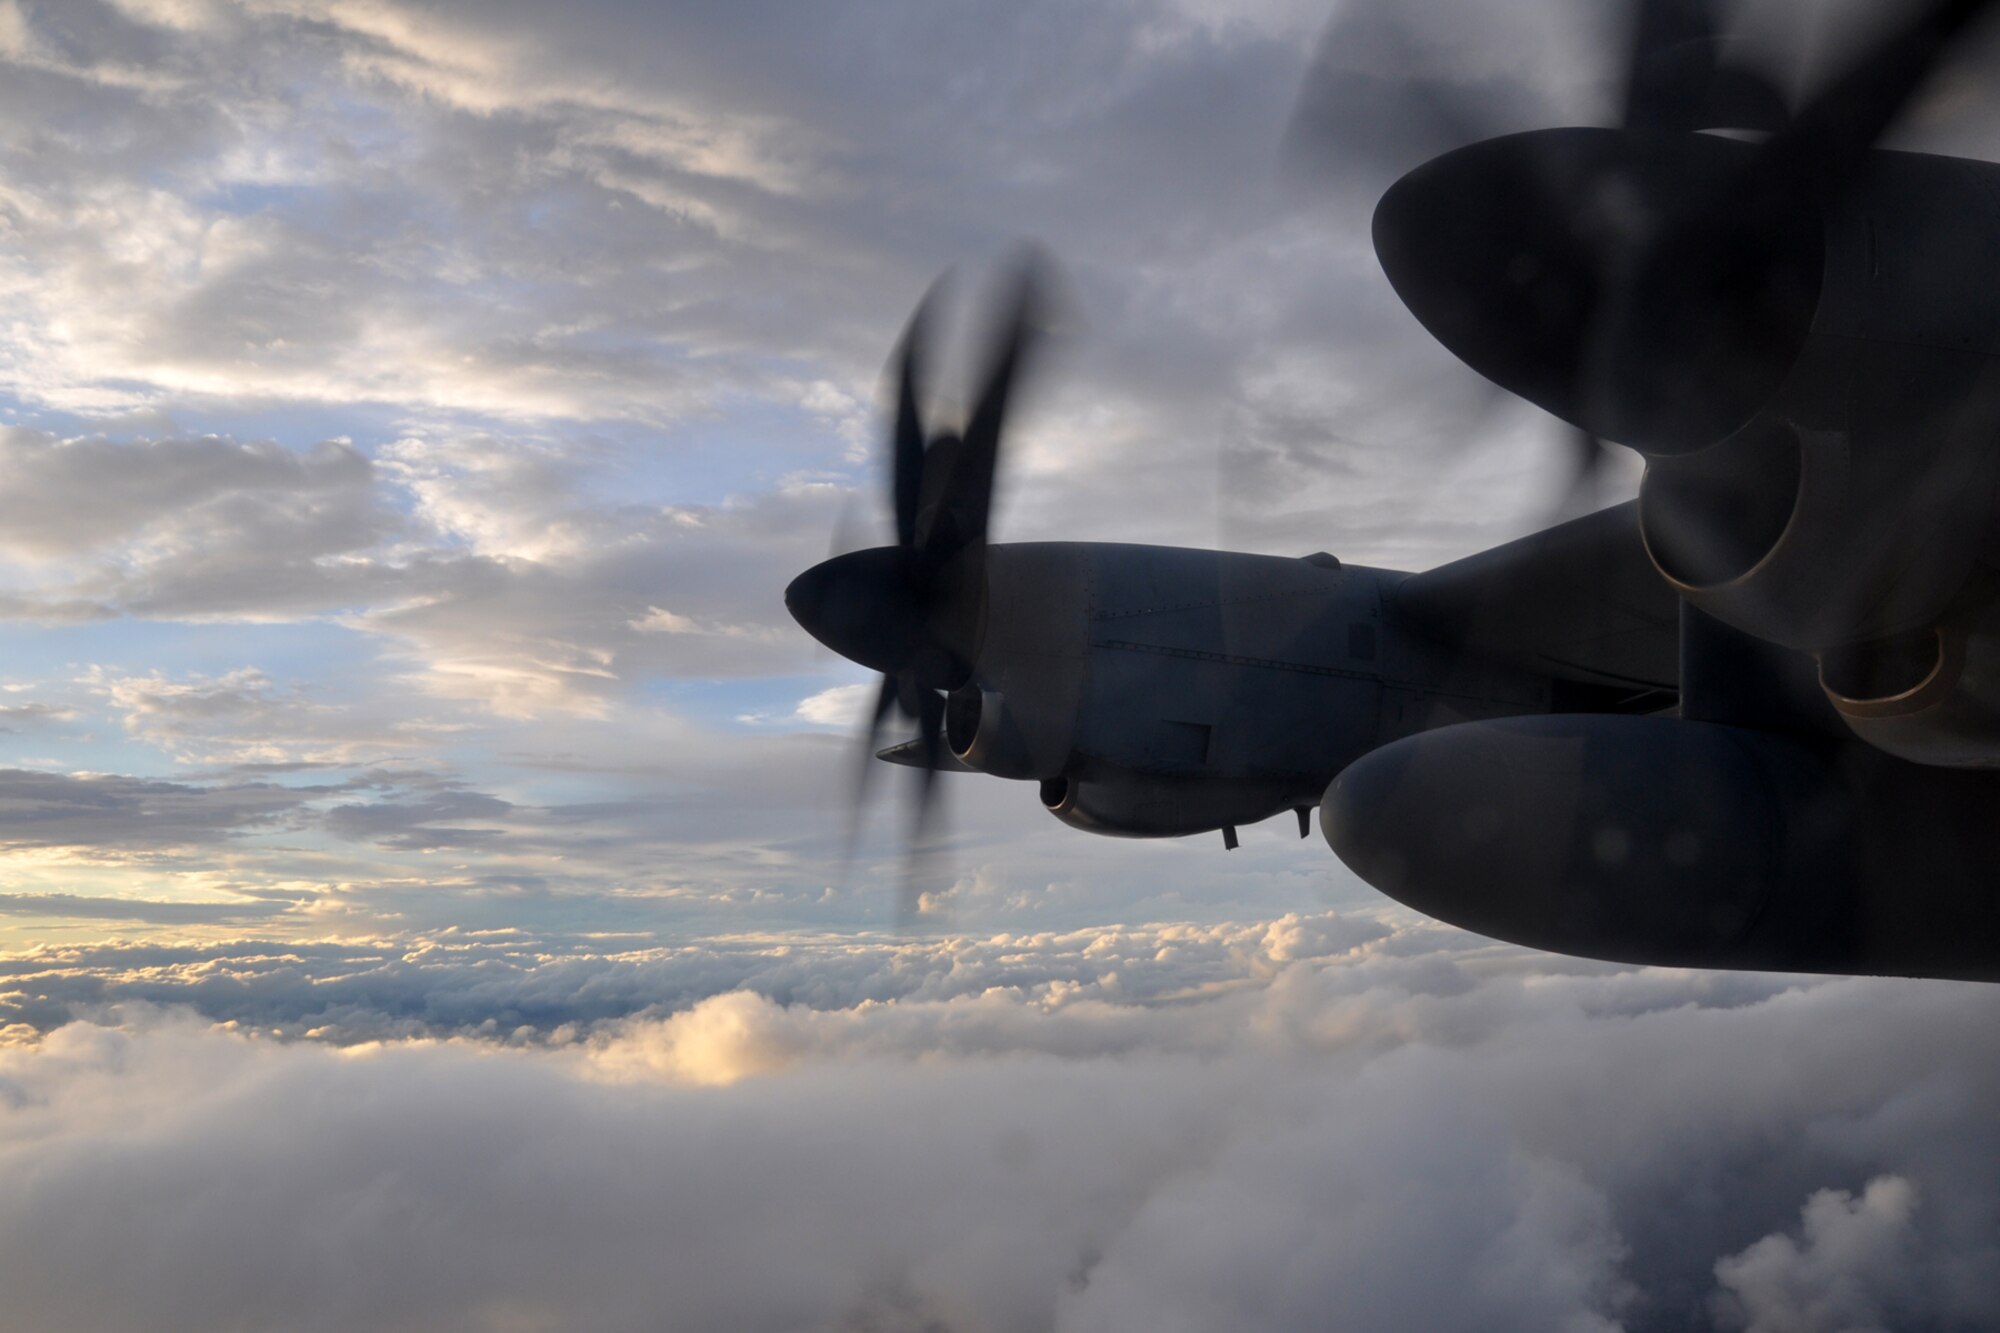 The sun tries to break through the thick clouds surrounding the WC-130J aircraft as it penetrates Tropical Storm Lee Sept. 2. The 53rd Weather Reconnaissance Squadron “Hurricane Hunters,” were gathering atmospheric data to relay to the National Hurricane Center for their forecast models. (U.S. Air Force photo by Staff Sgt. Valerie Smock)